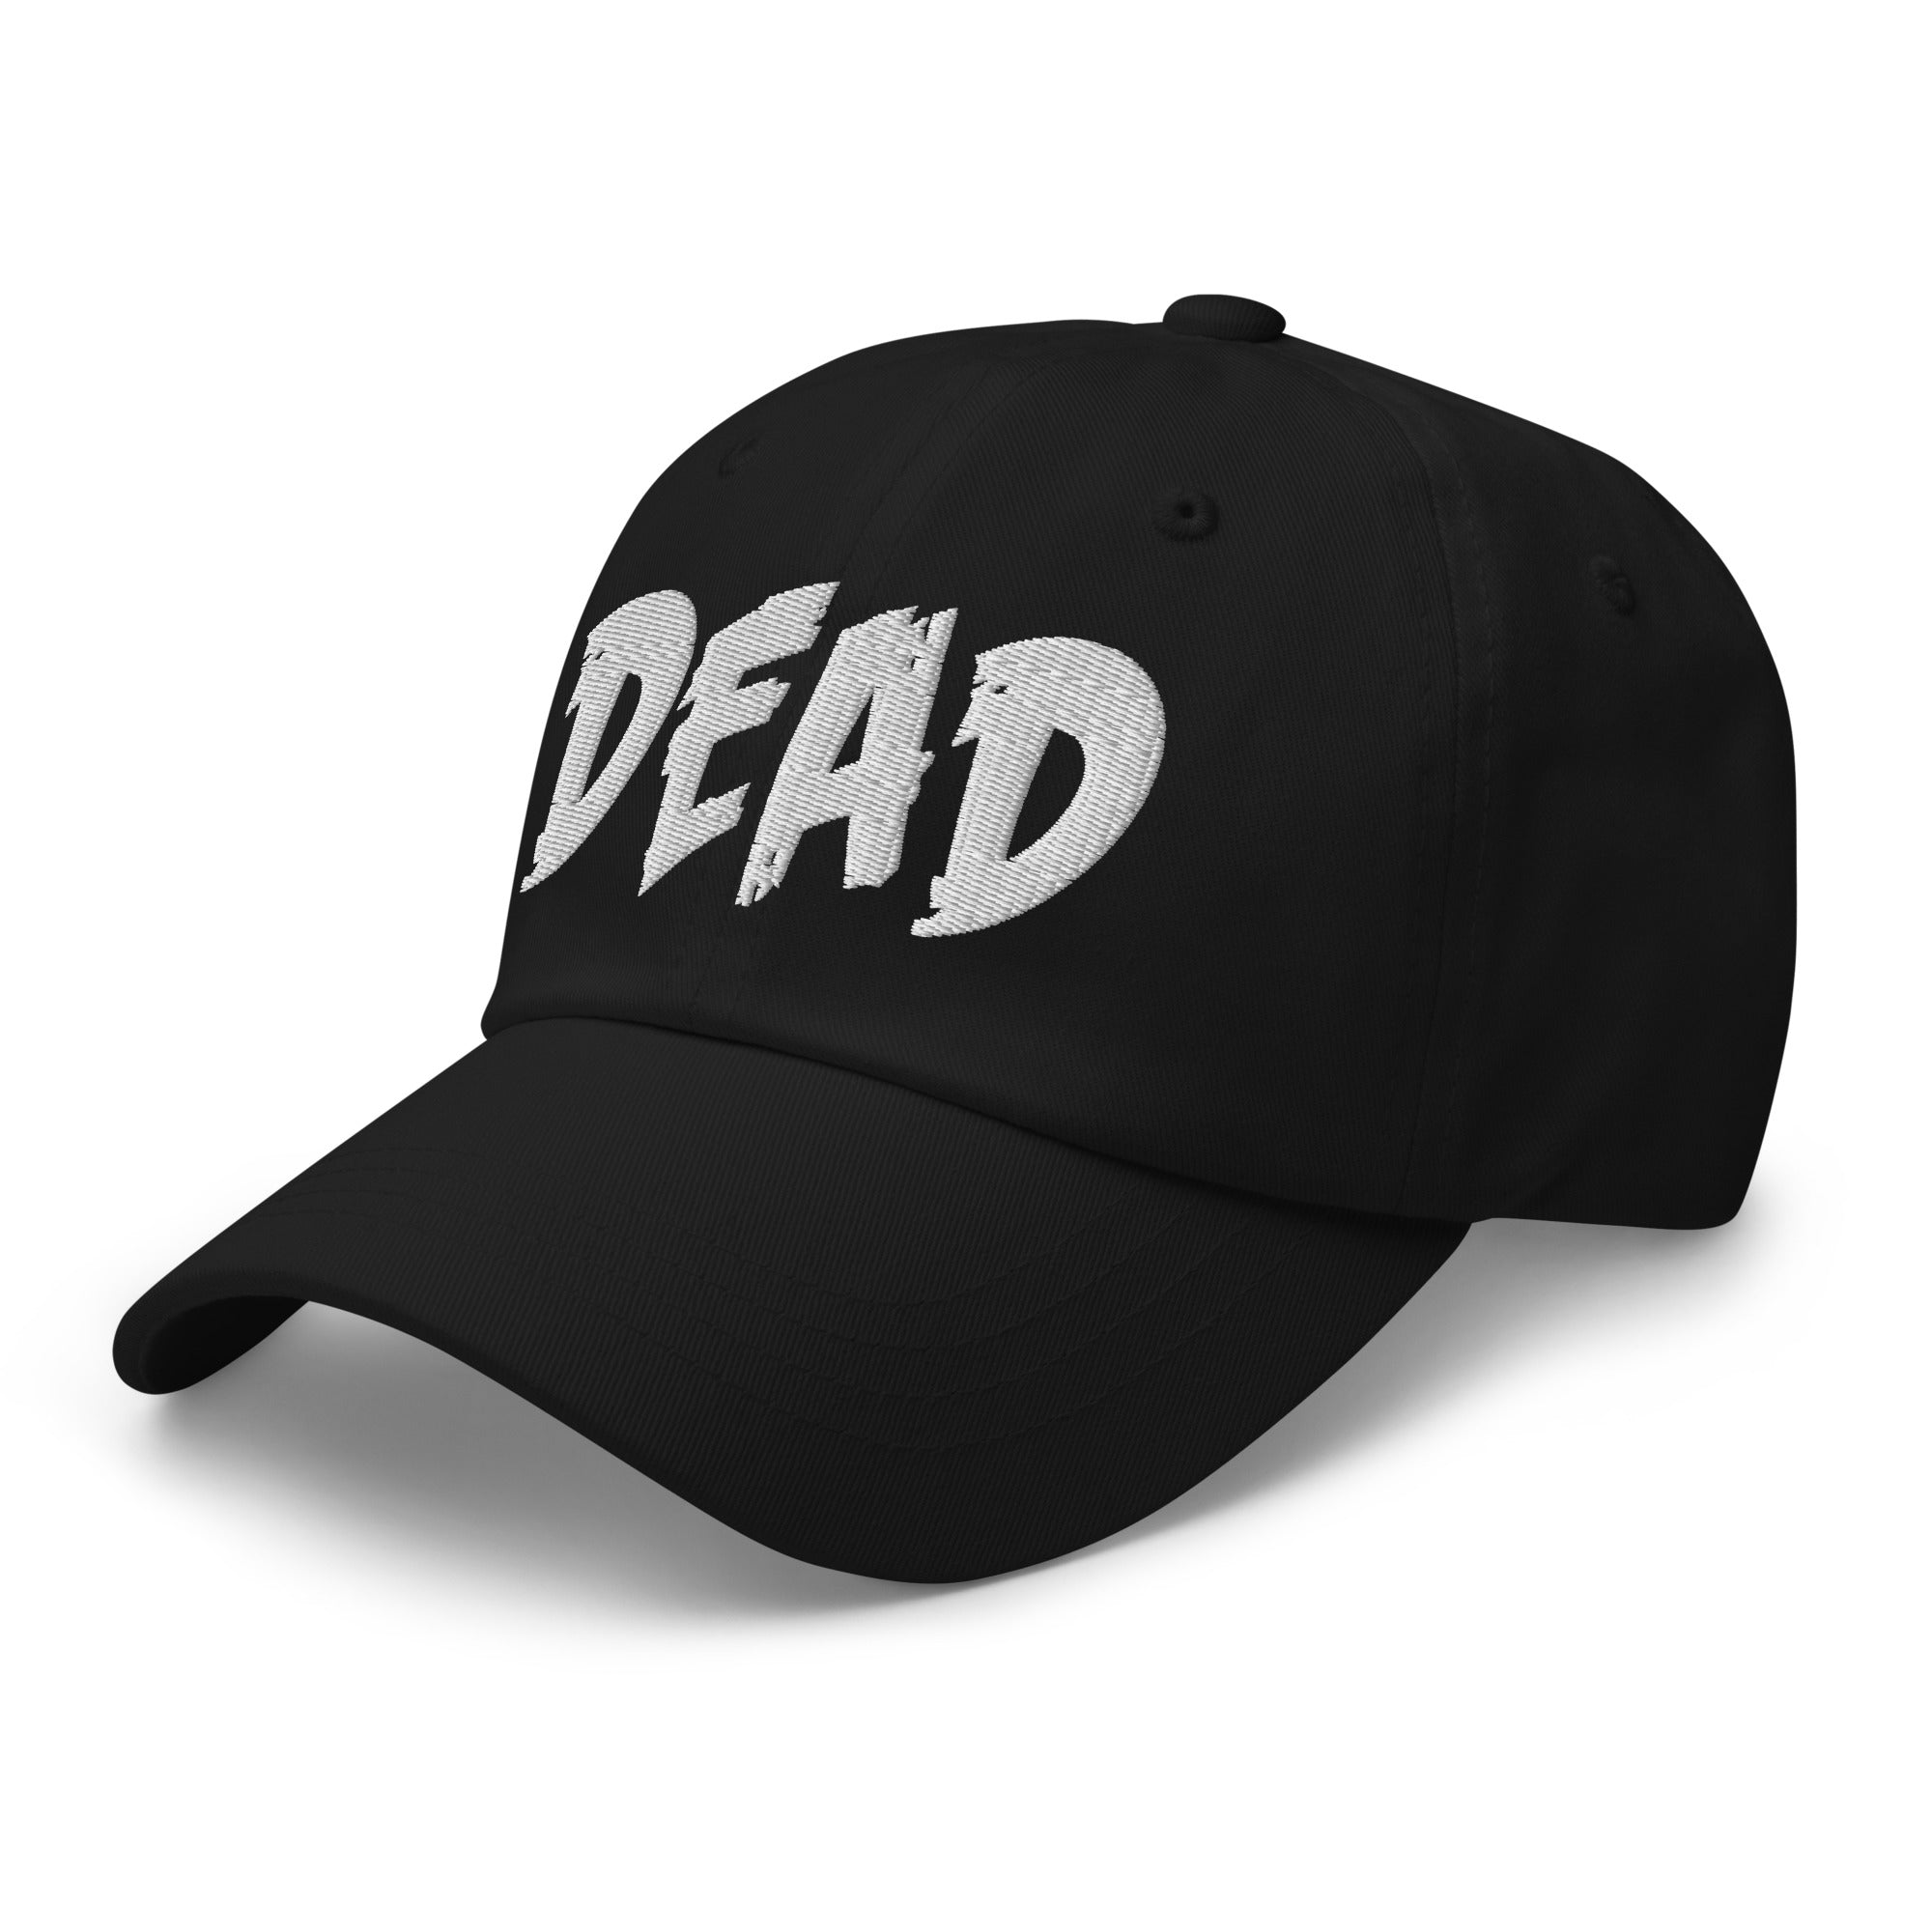 DEAD Emotional Depression Embroidered Baseball Cap White Thread Dad hat - Edge of Life Designs